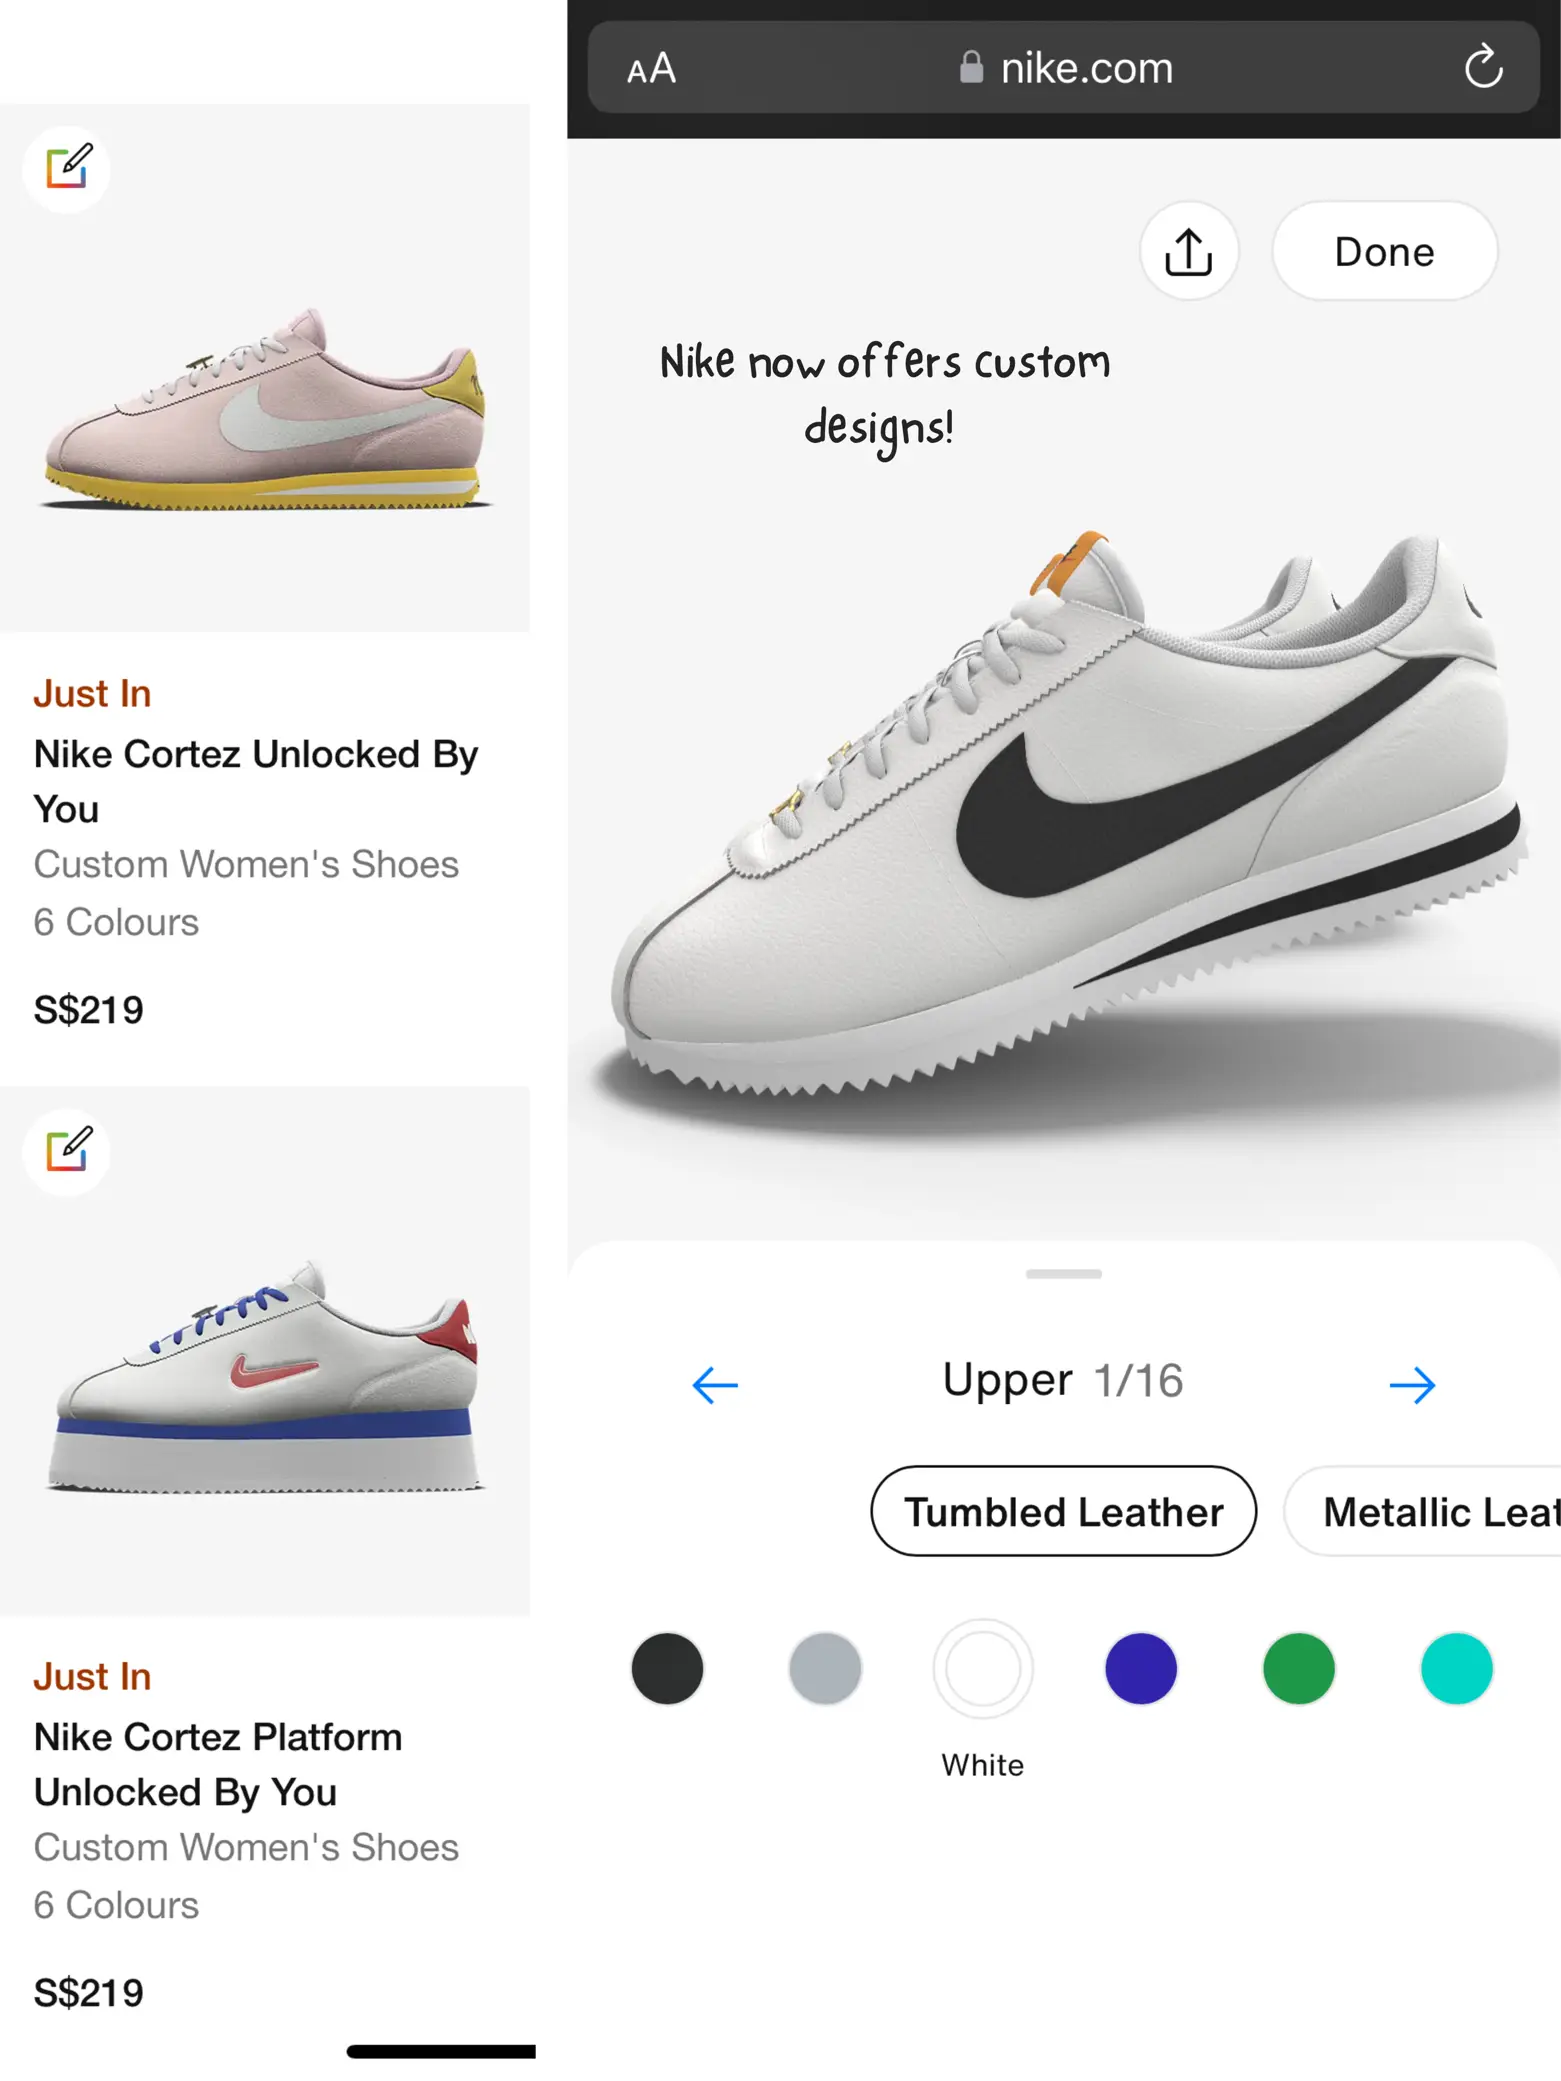 my everyday sneakers is now customisable! 👟, Gallery posted by zi en ◡̈